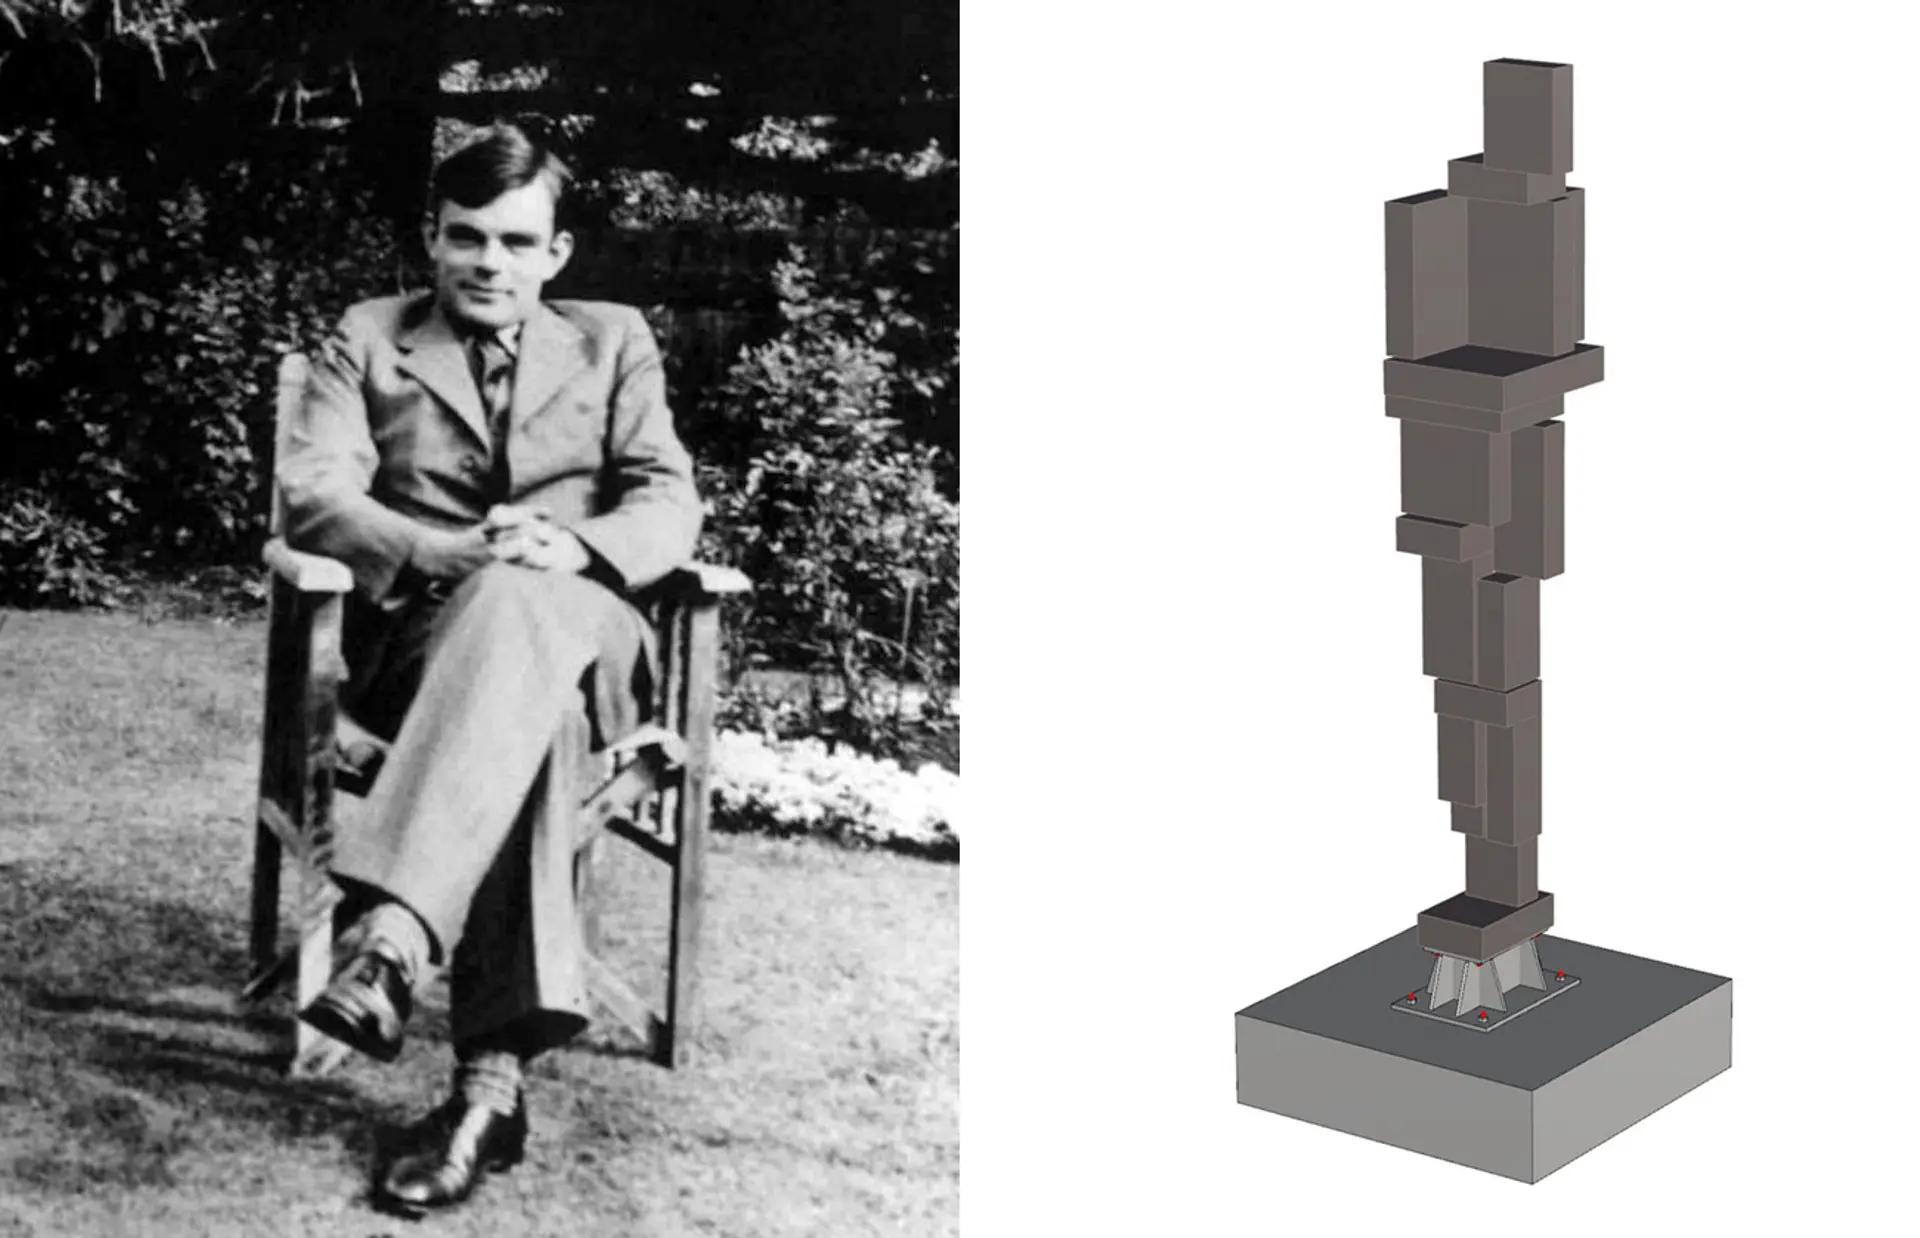 Left: Alan Turing in 1930. Right: Antony Gormley's proposed sculpture to commemorate Turing

Sculpture rendering: courtesy of the Antony Gormley Studio/Cambridge City Council